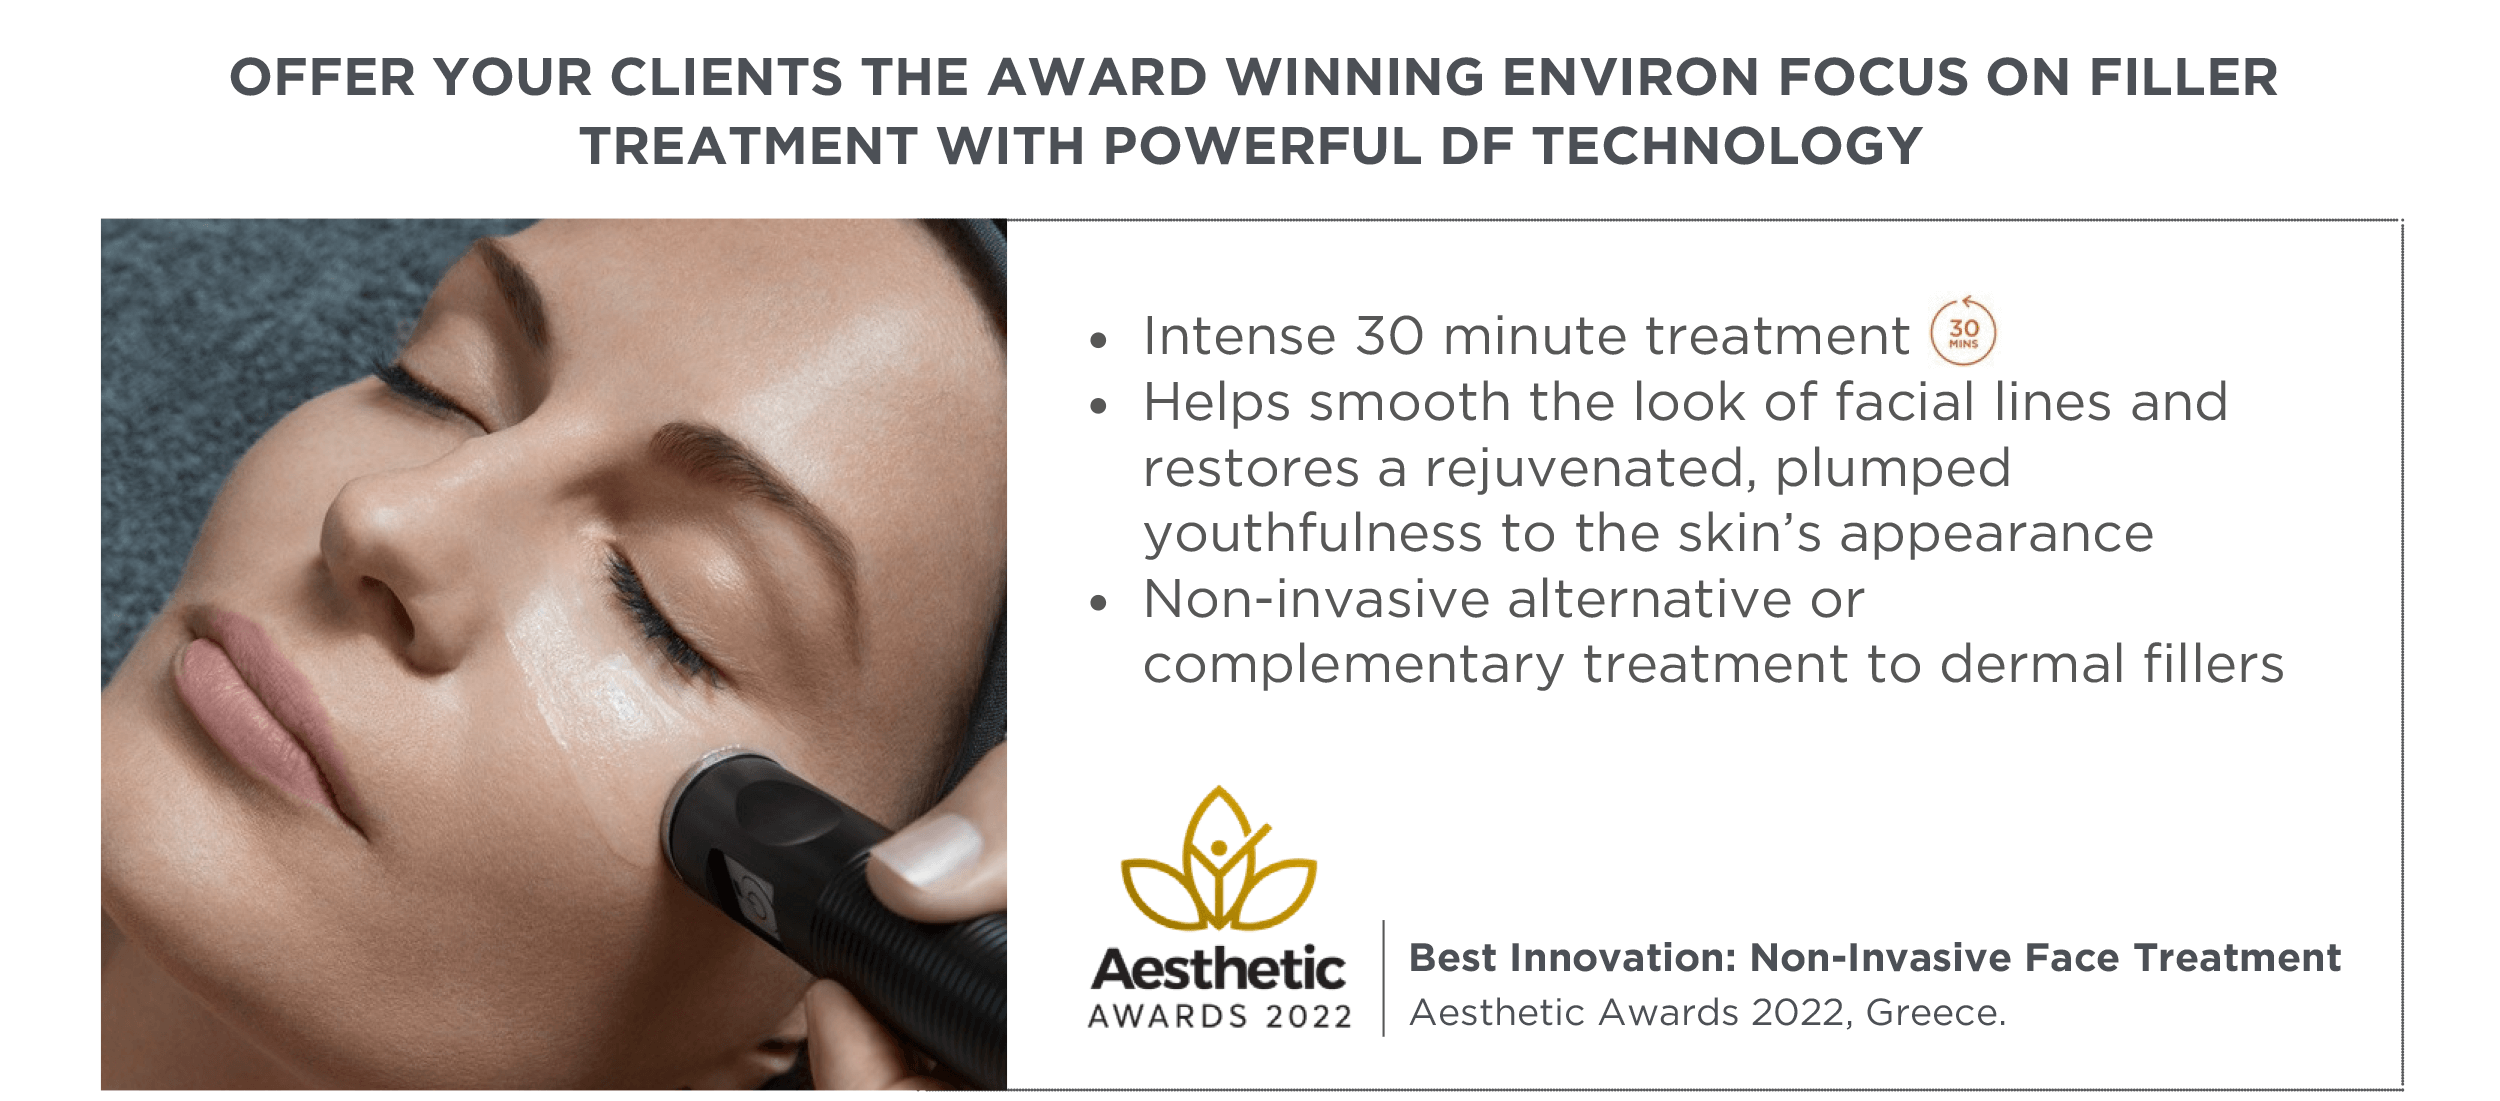 OFFER YOUR CLIENTS THE AWARD WINNING ENVIRON FOCUS ON FILLER TREATMENT WITH POWERFUL DF TECHNOLOGY